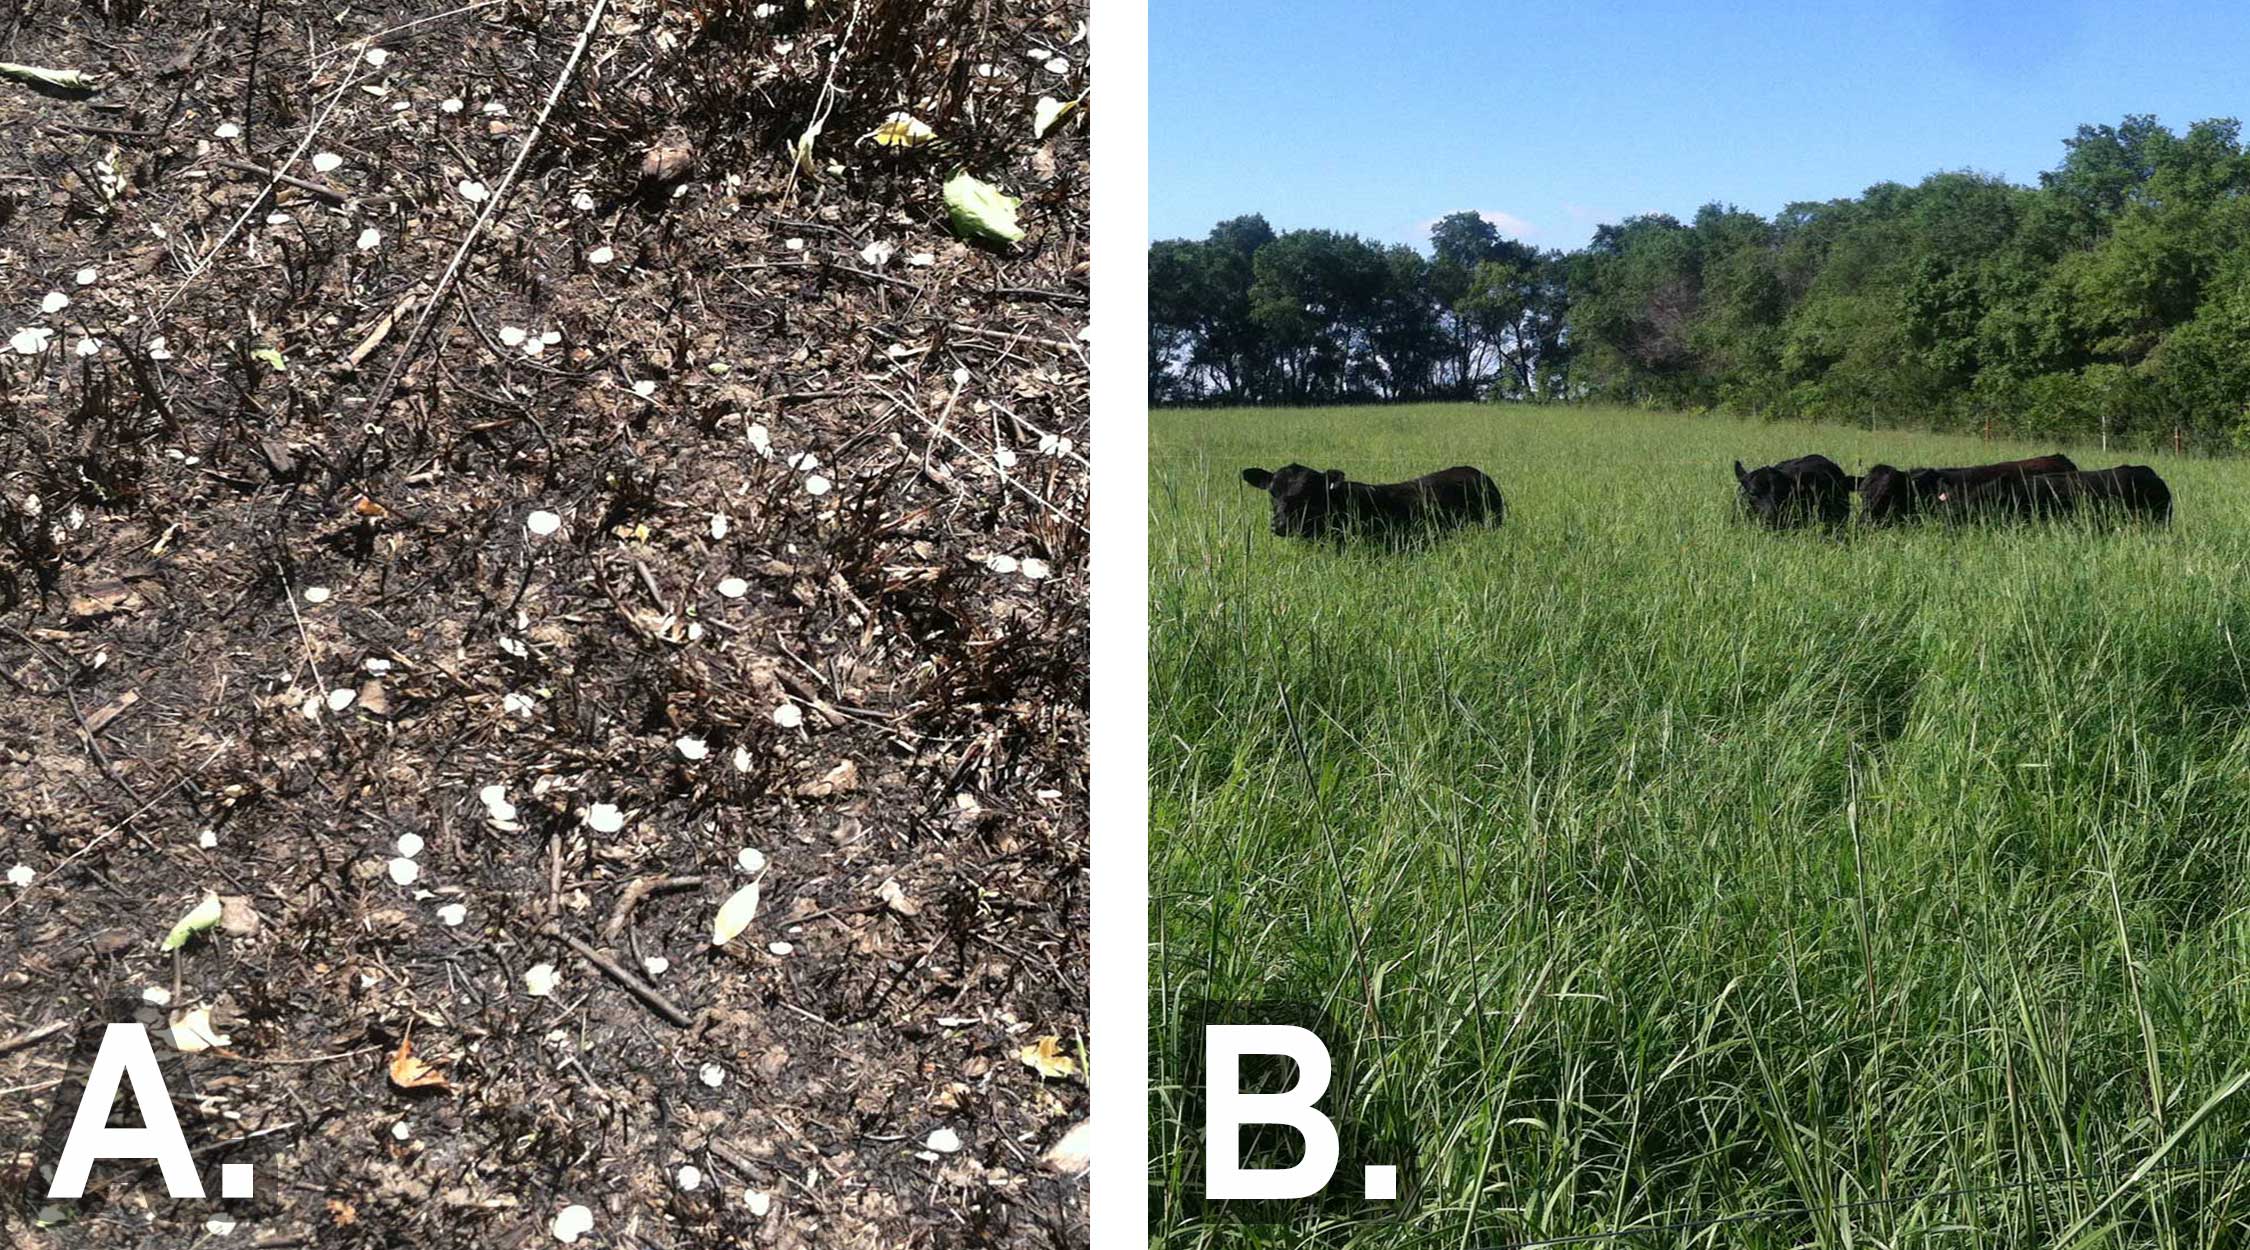 Left: Figure 9-A, Several Siberian elm seeds scattered on a patch of burned grassland. Right: Figure 9-B, cattle grazing in a grassland management area.